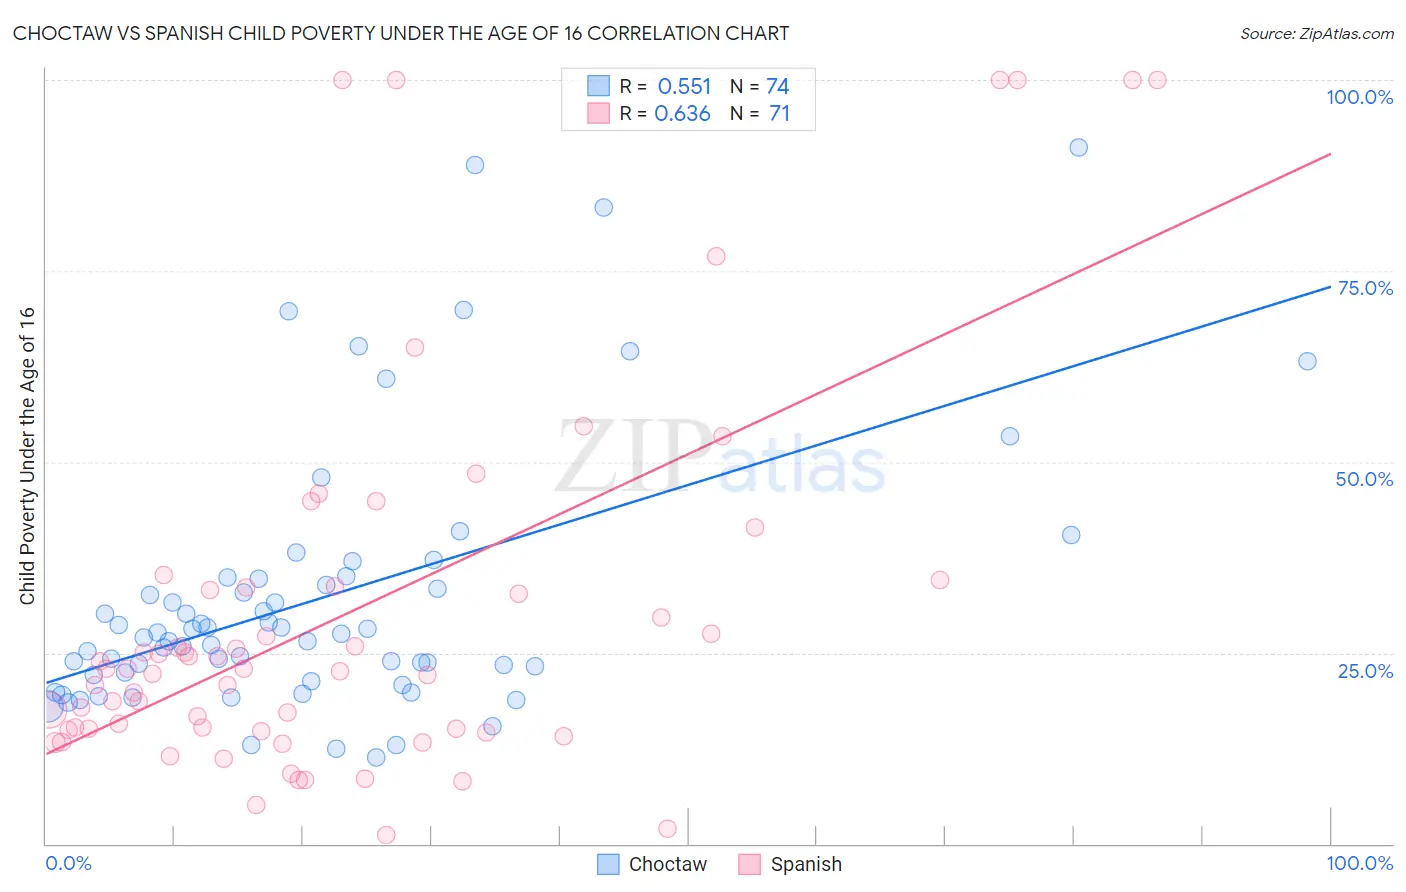 Choctaw vs Spanish Child Poverty Under the Age of 16